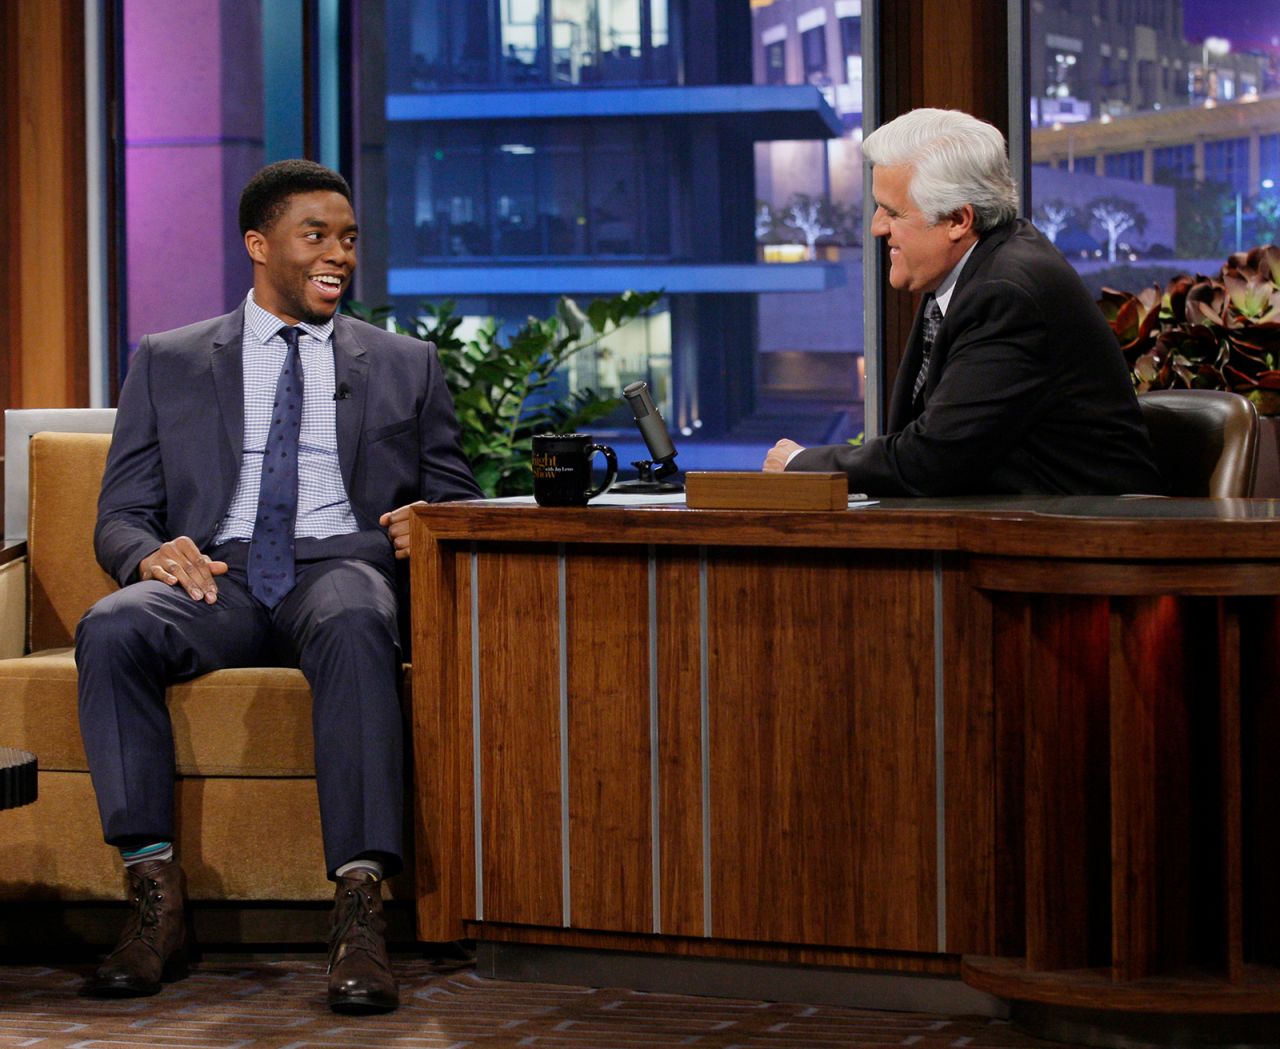 Boseman is interviewed on "The Tonight Show with Jay Leno" soon after "42" hit theaters.